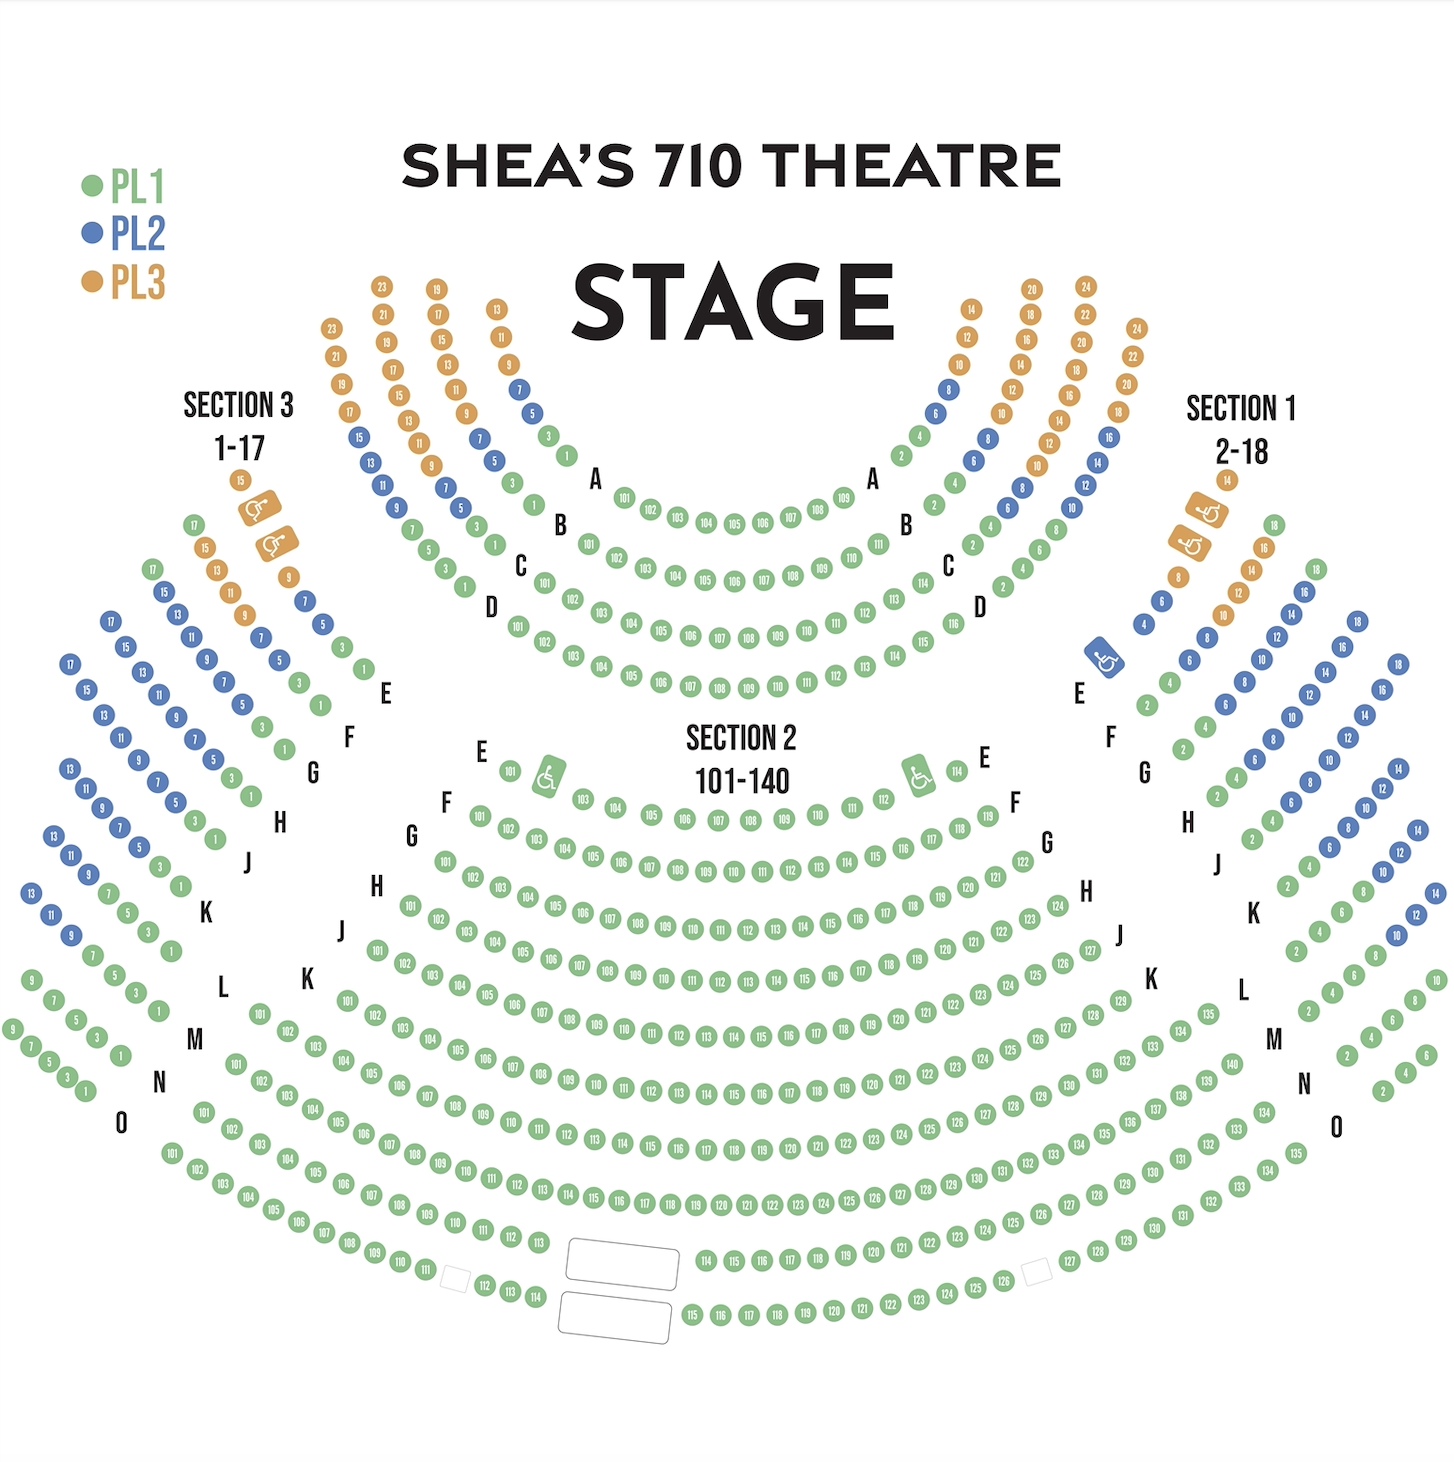 This map is provided only as reference and does not indicate seating